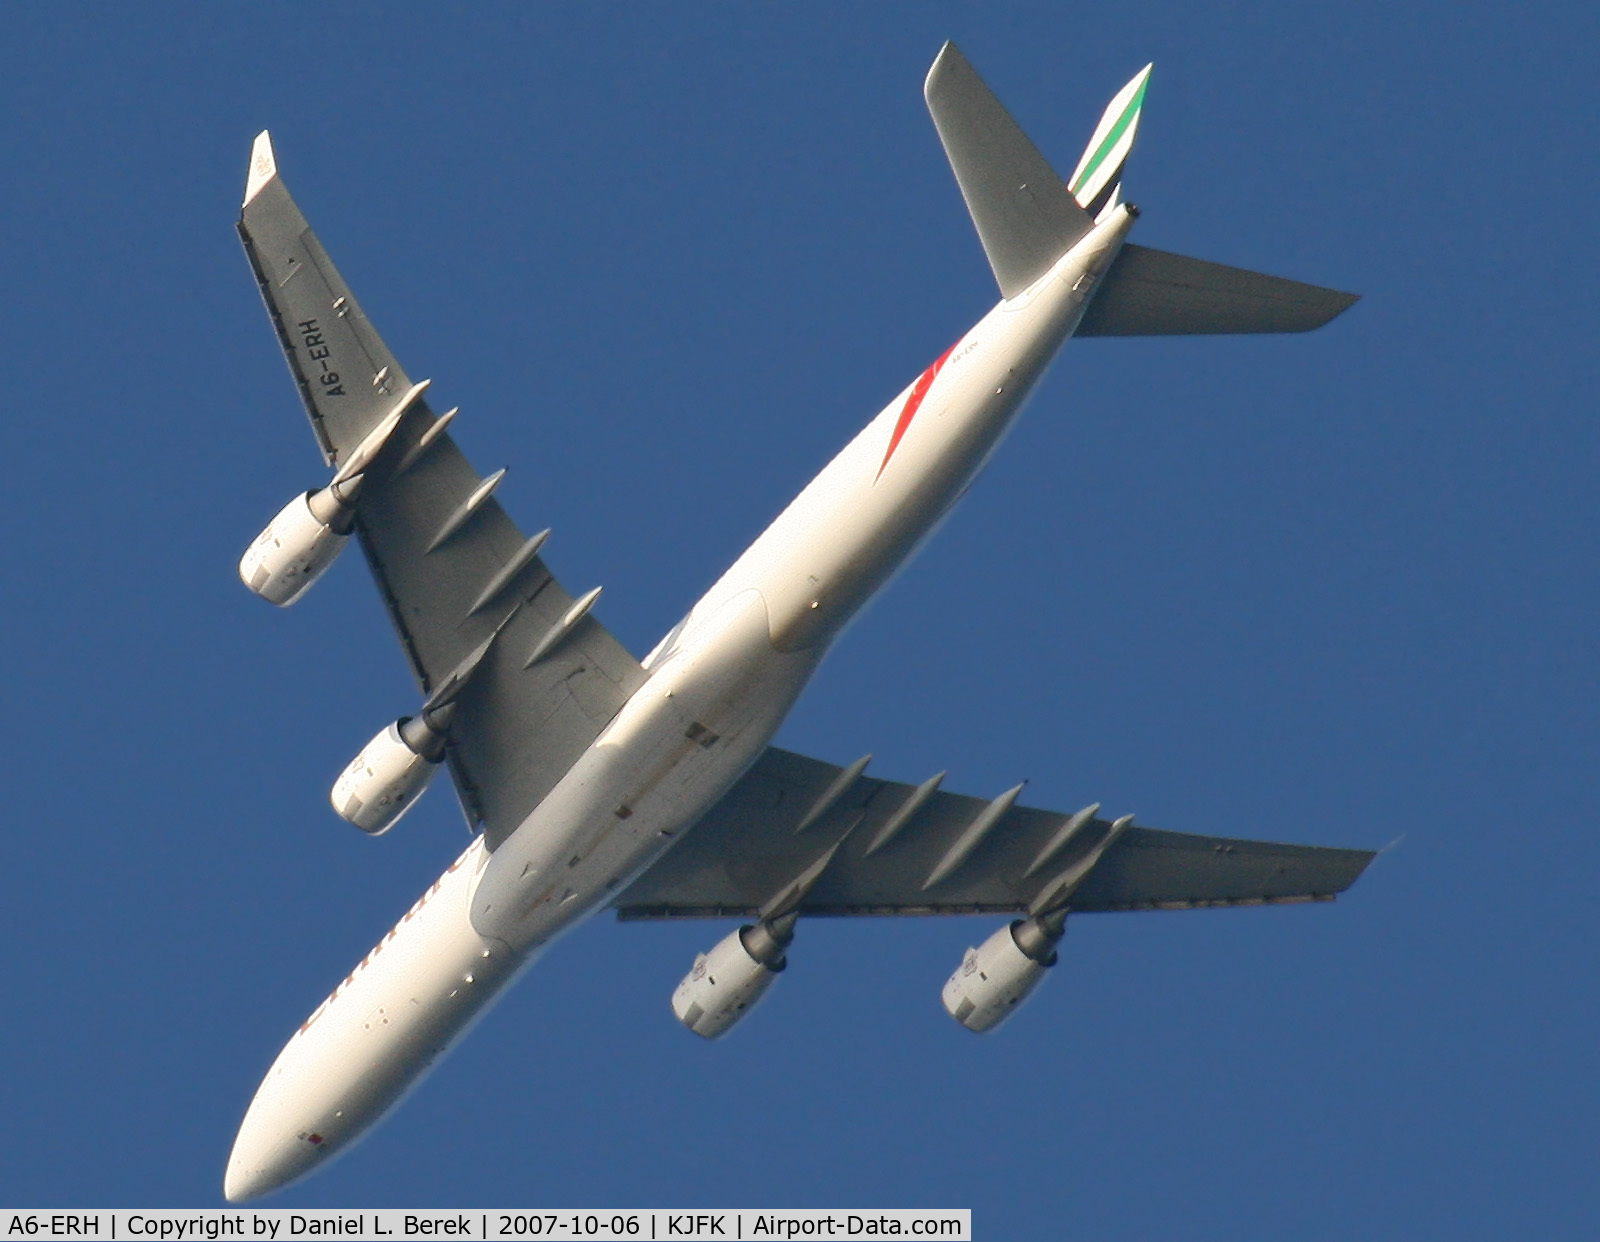 A6-ERH, 2004 Airbus A340-541 C/N 611, An Italian Boeing Triple-7 glides serenly over New Jersey's Sandy Hook on it approach to JFK.